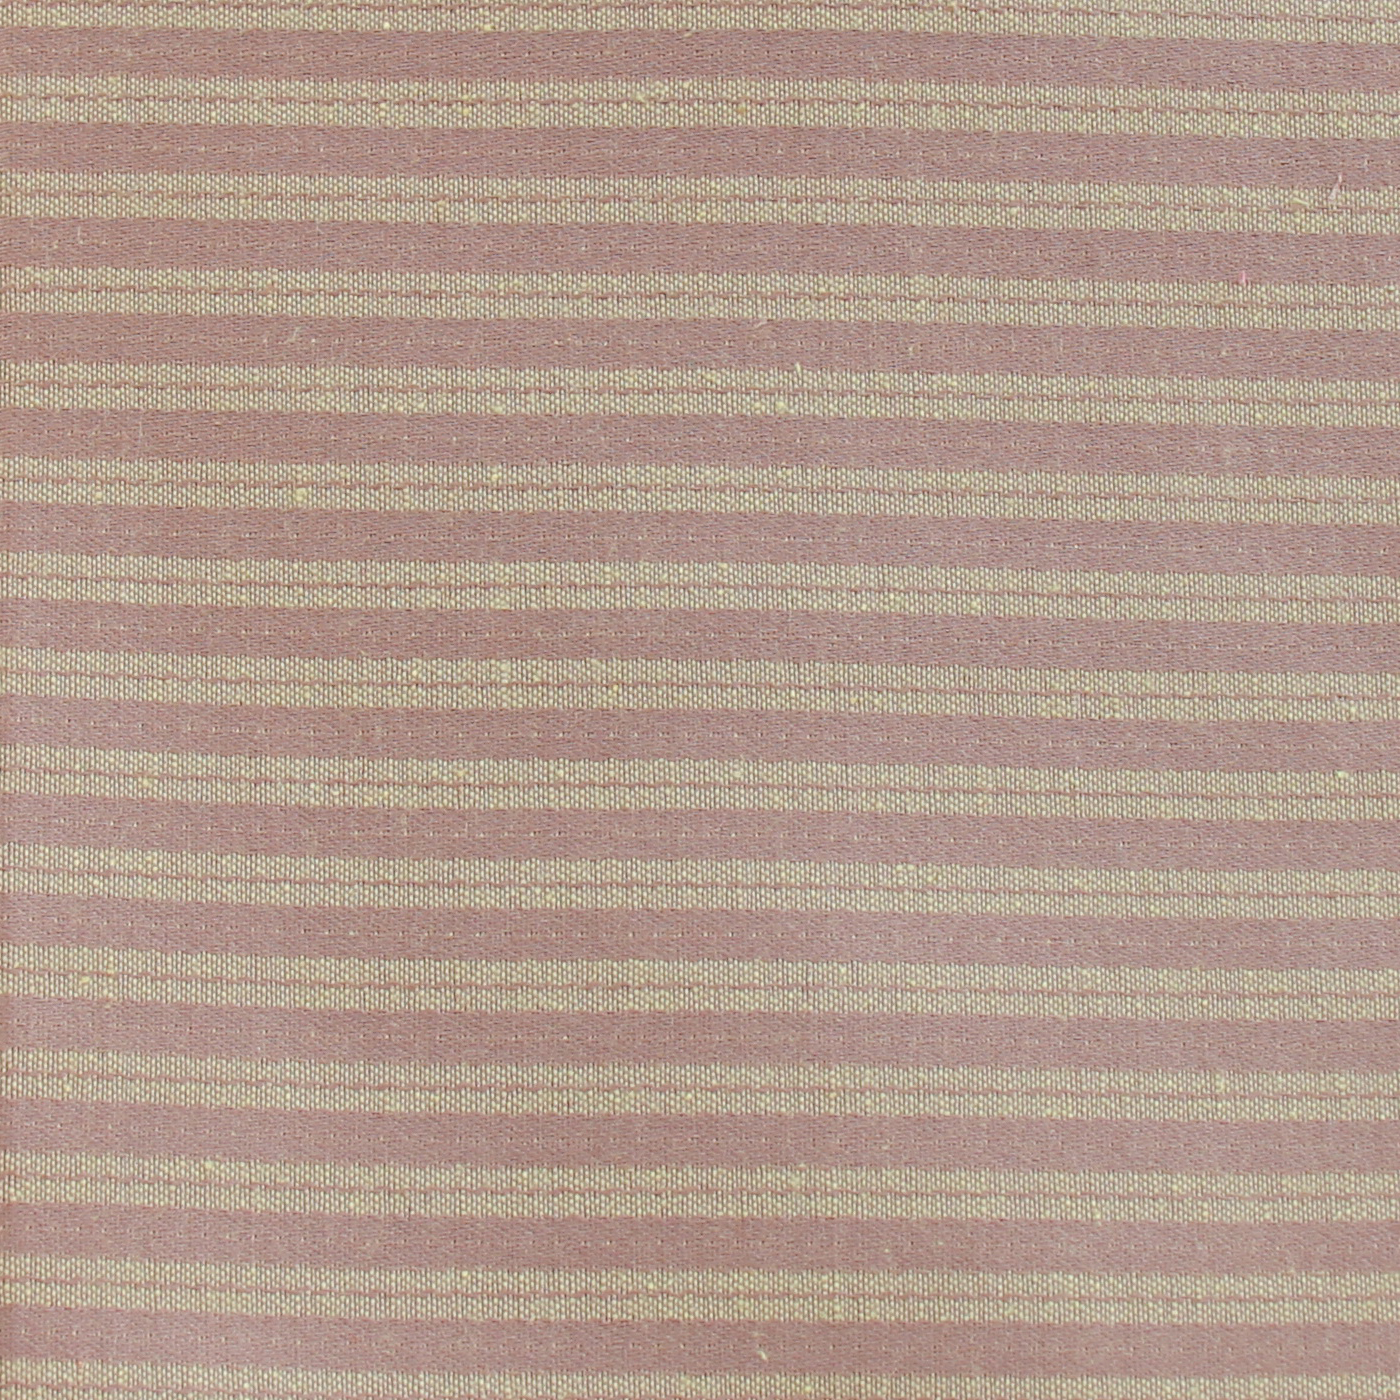 NO 7-45 RS X1 NO 29 Fabric Upholstery Sample